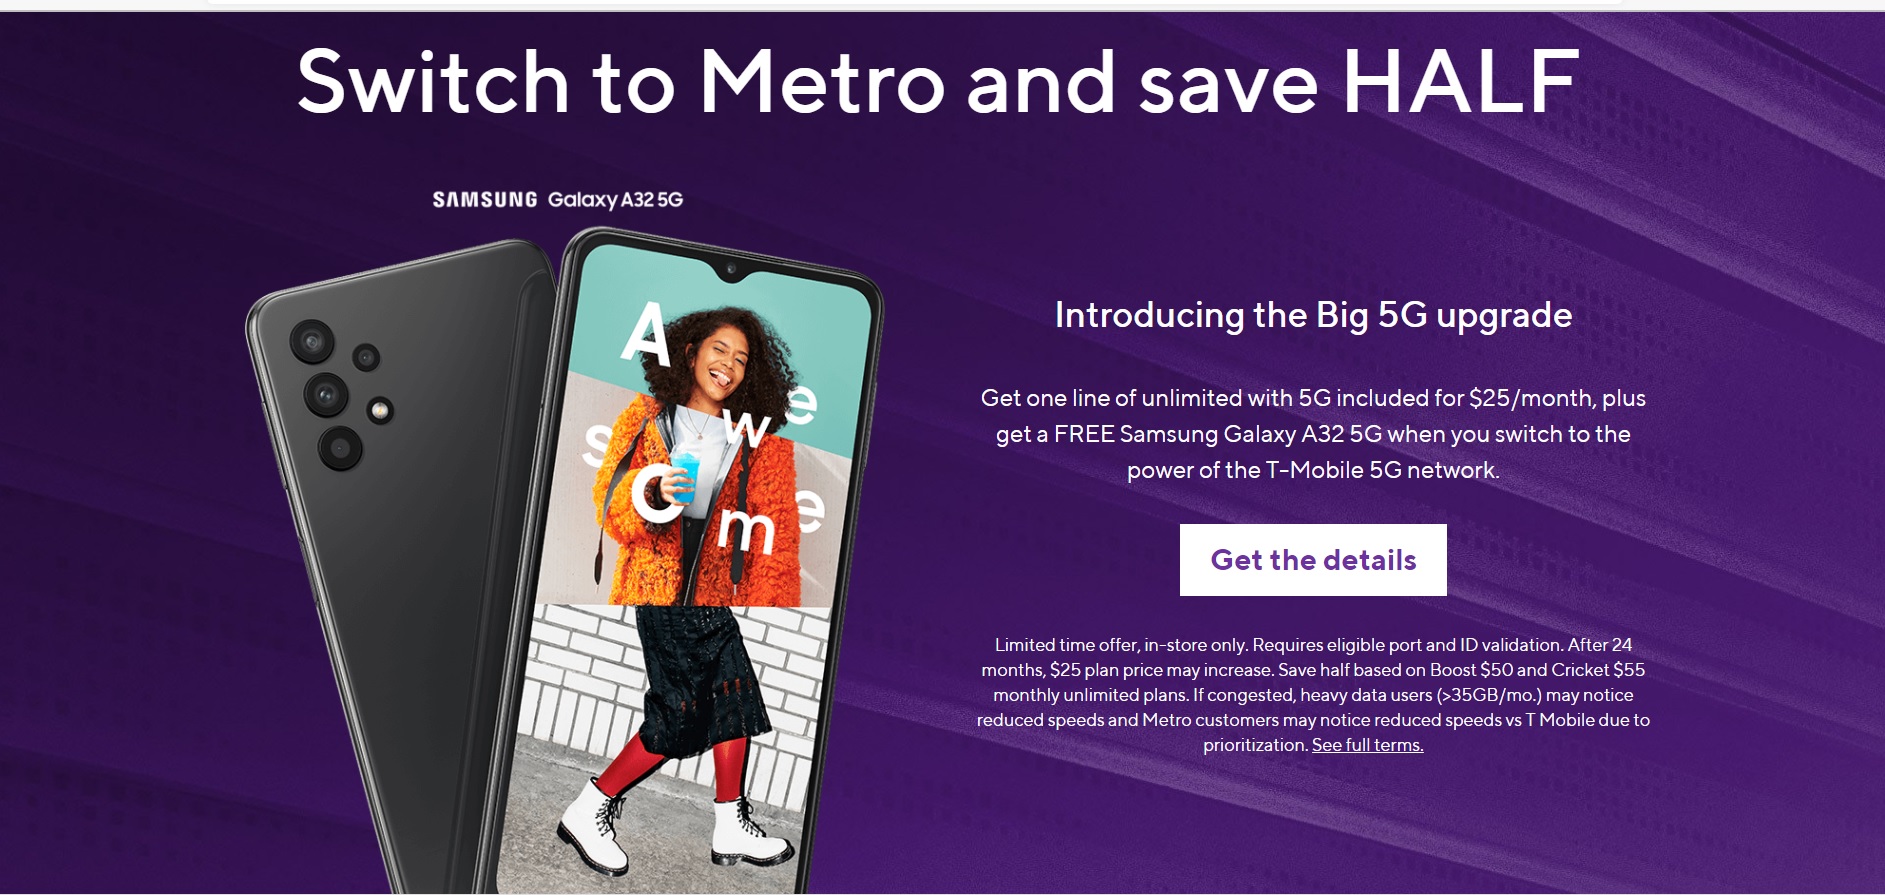 Metro by T-Mobile - Samsung A32(5g) Free with port in and $25 plan